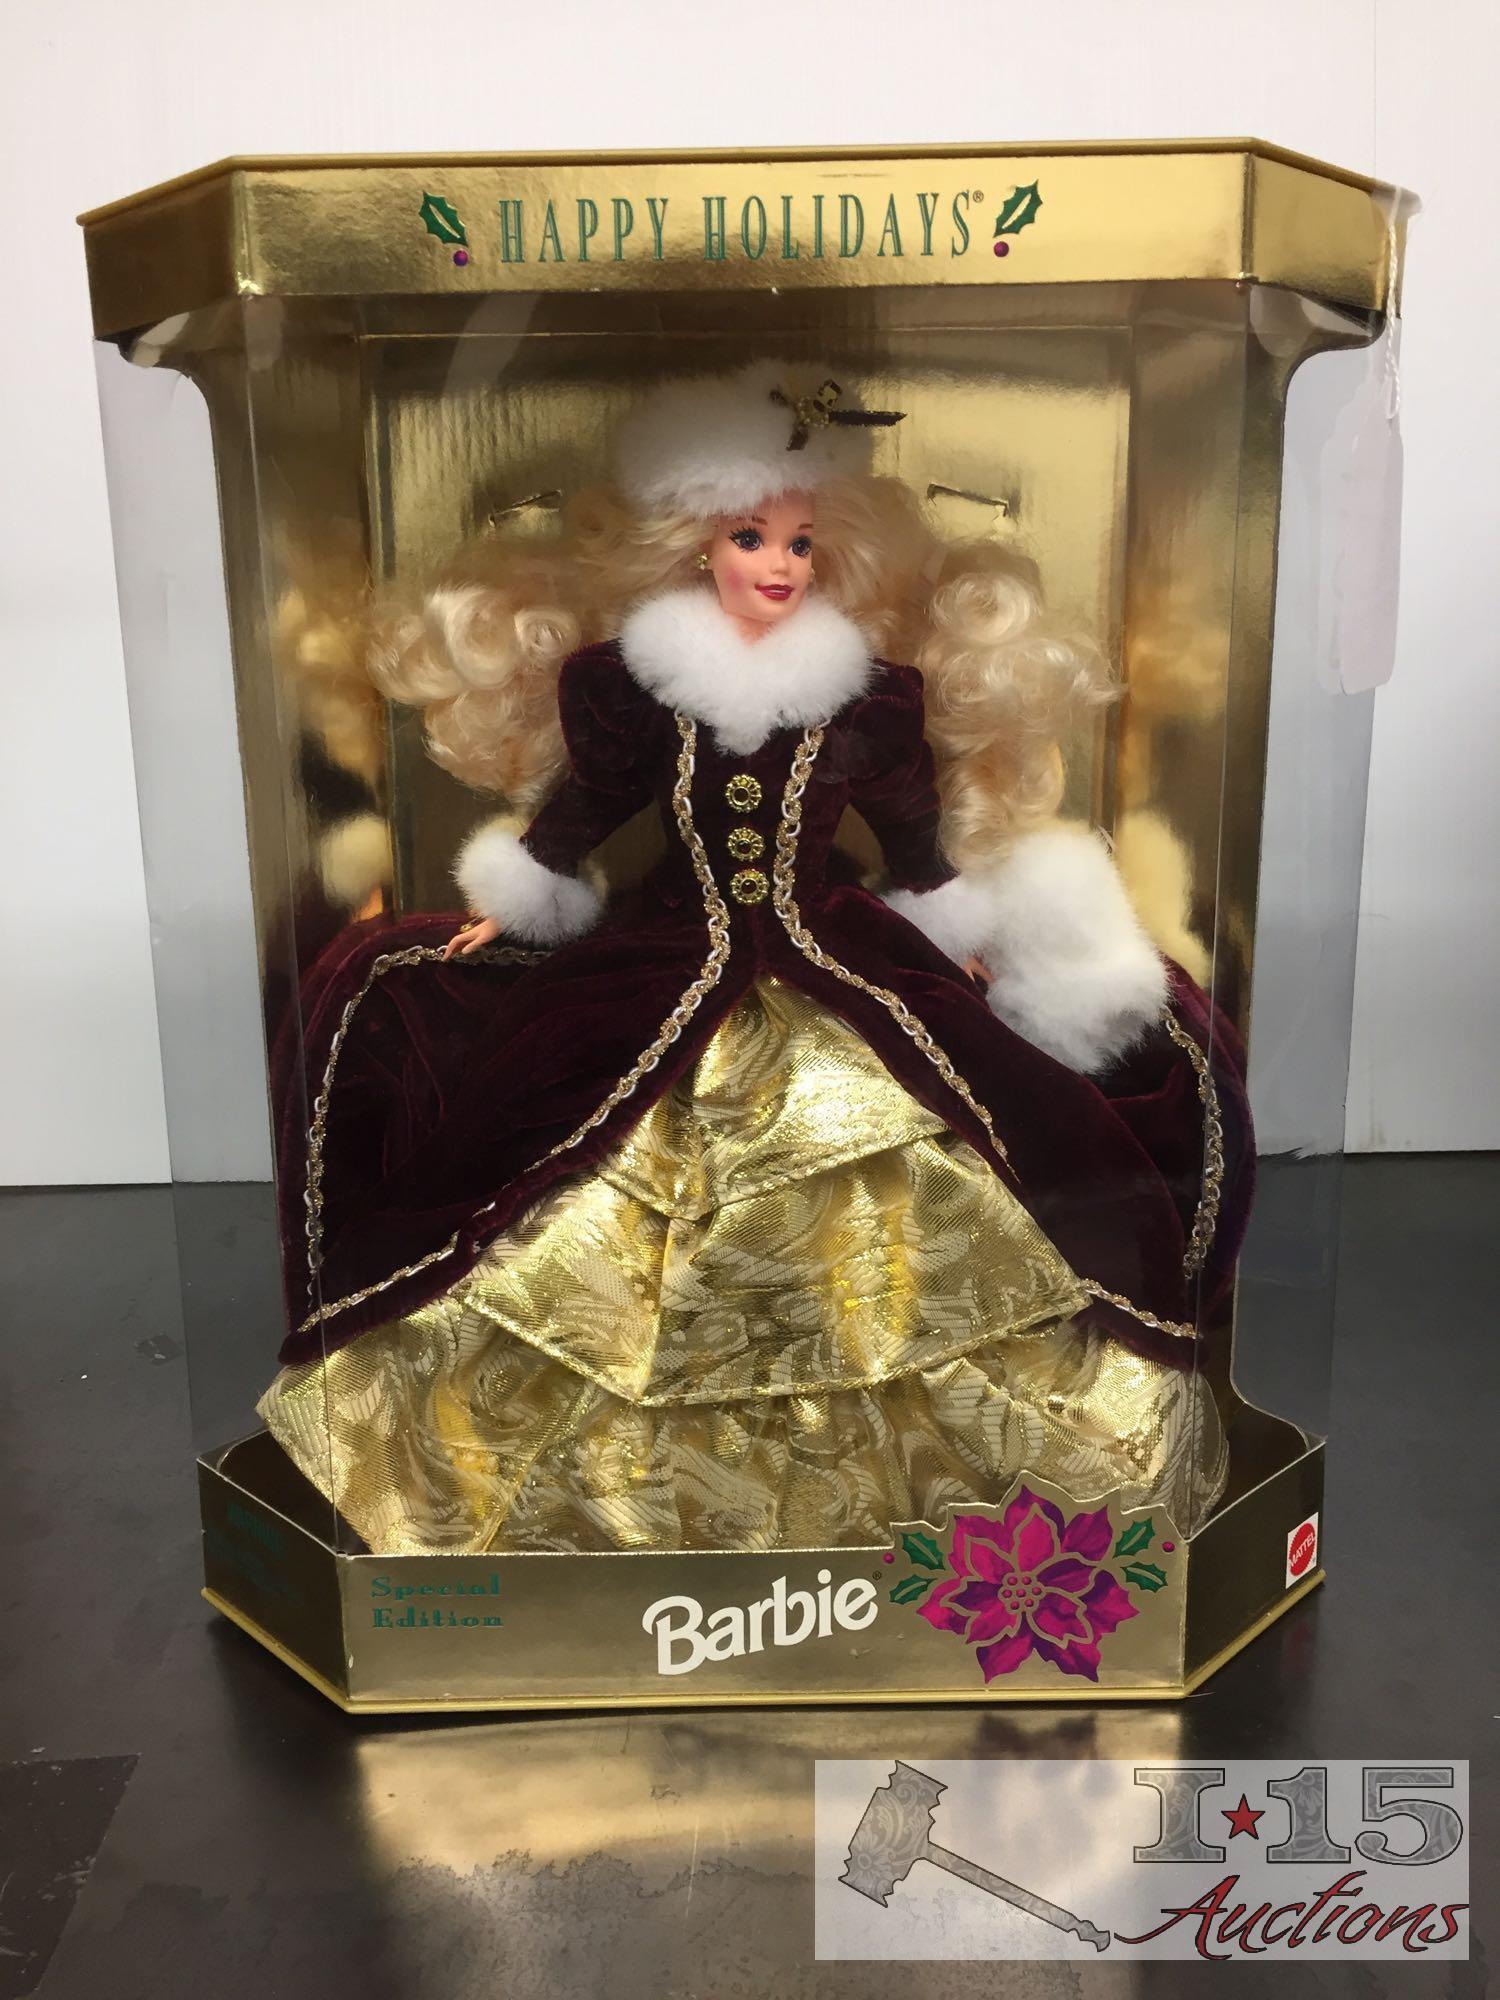 4 Collectible Barbies